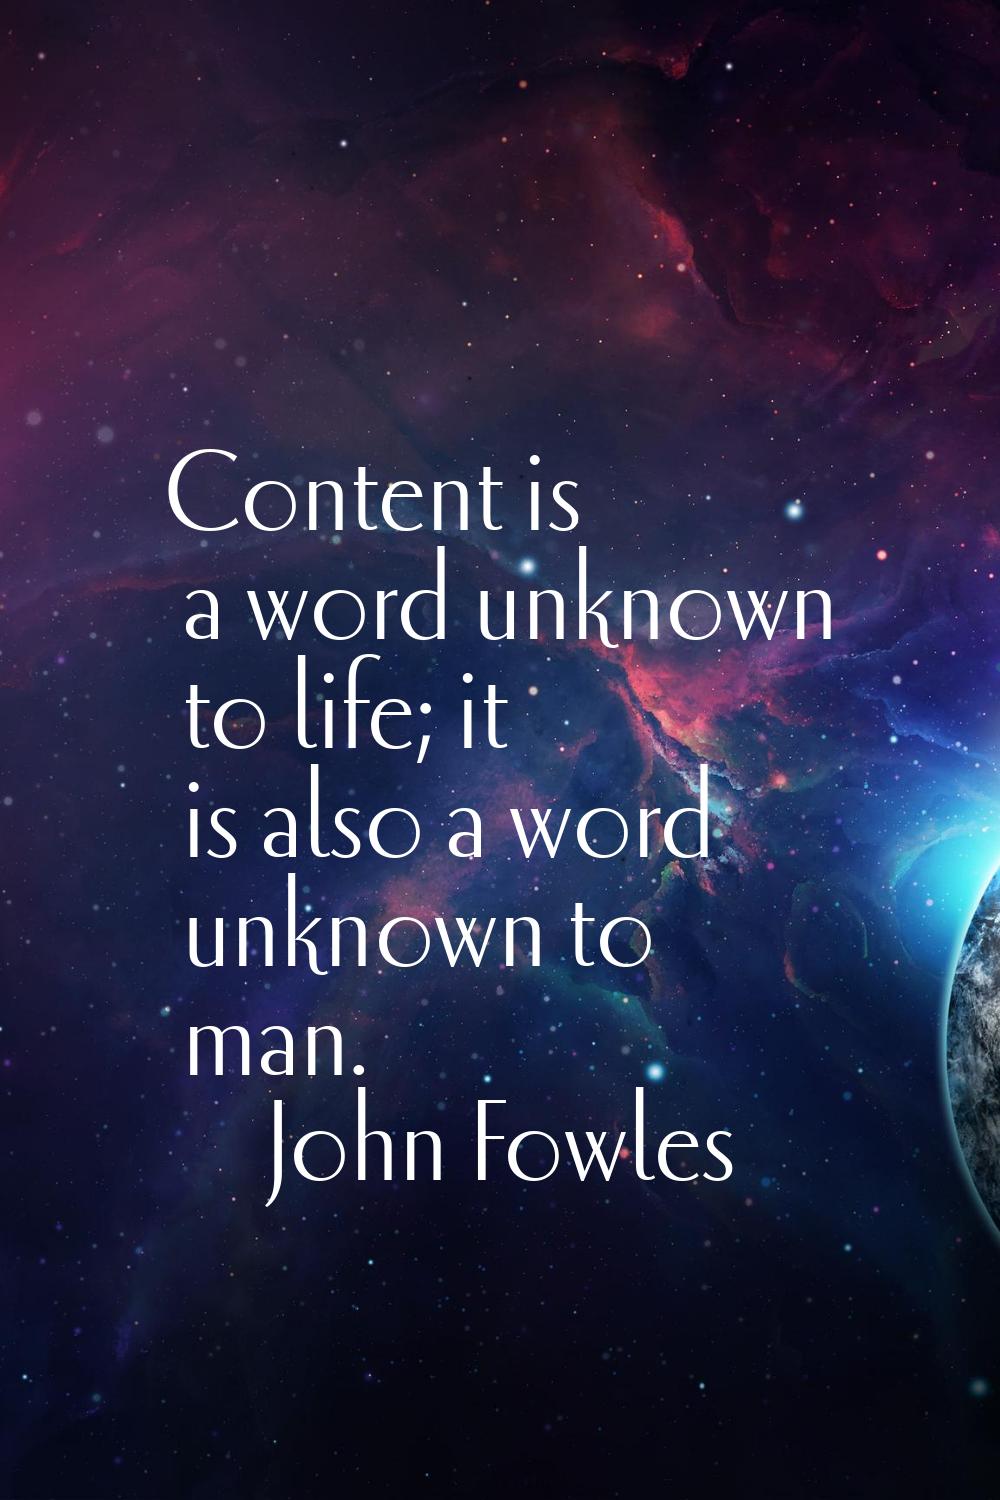 Content is a word unknown to life; it is also a word unknown to man.